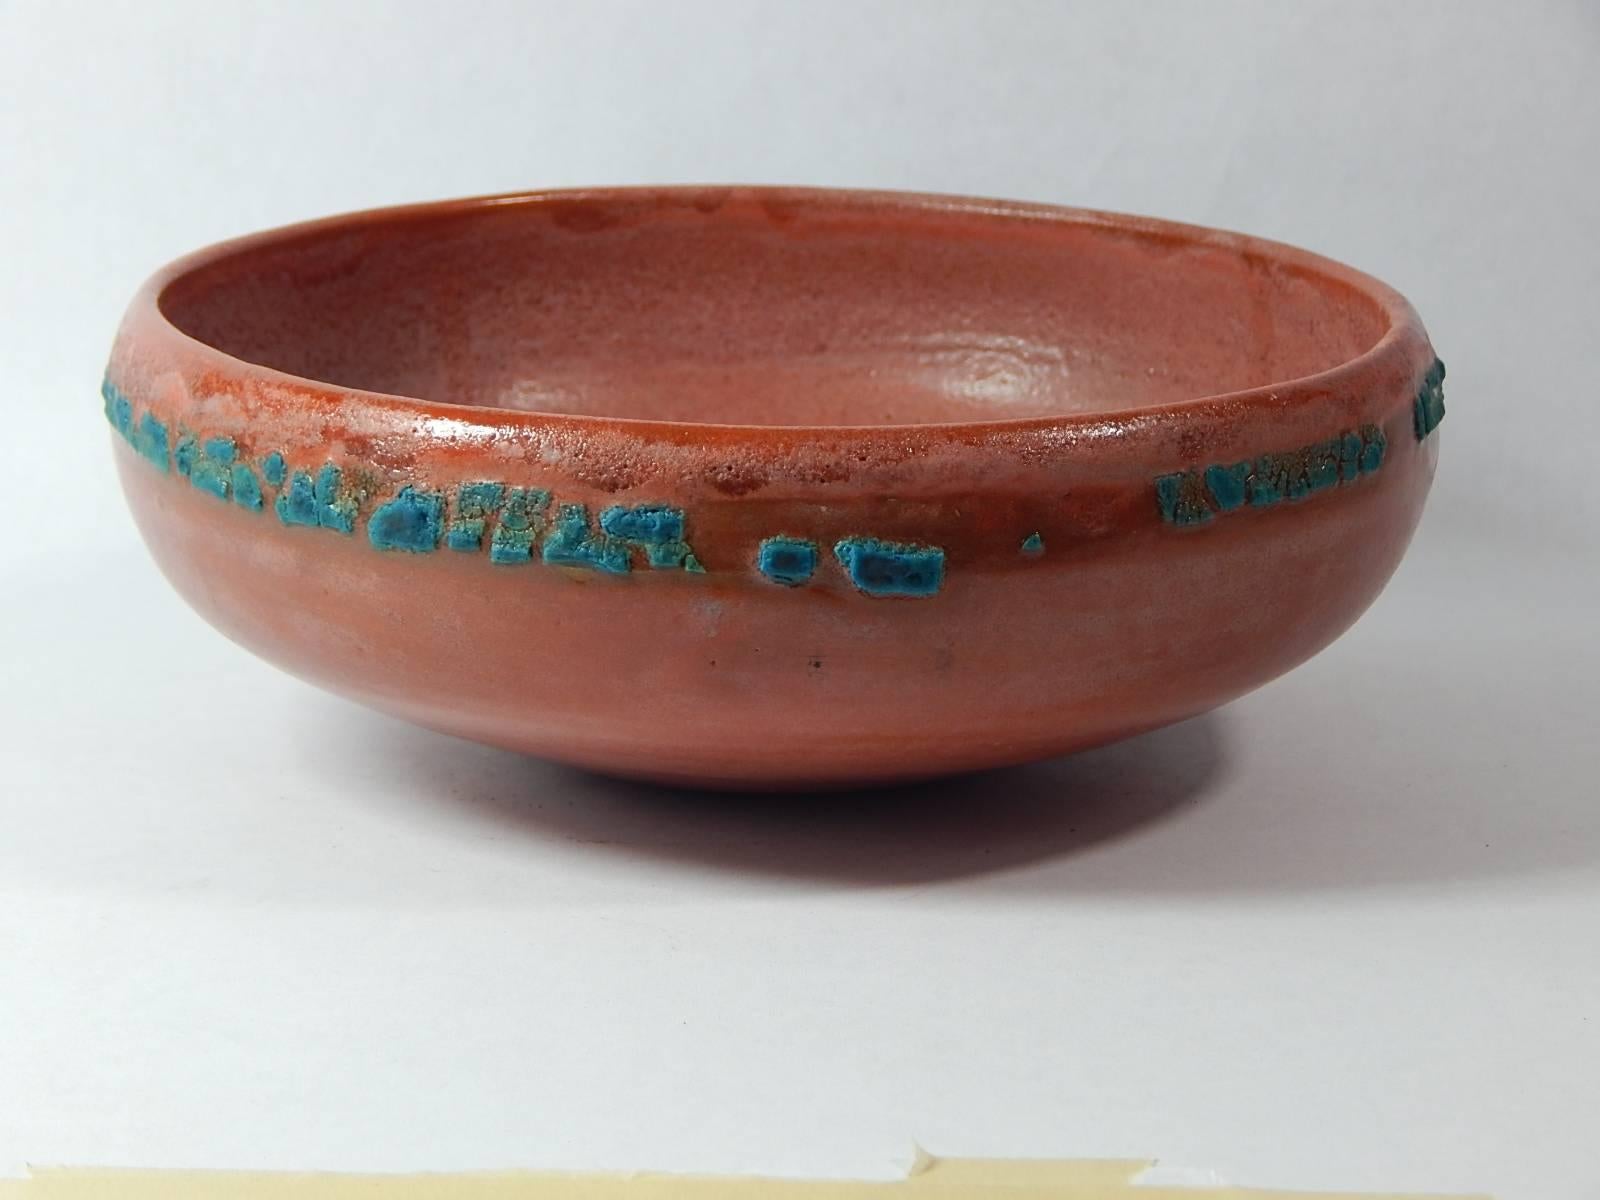 Relicware wheel thrown earthenware bowl by Andrew Wilder # 74. In terra cotta with turquoise lichen glaze and terra cotta colored over glaze . Made by hand in Los Angeles, California 2017.
 